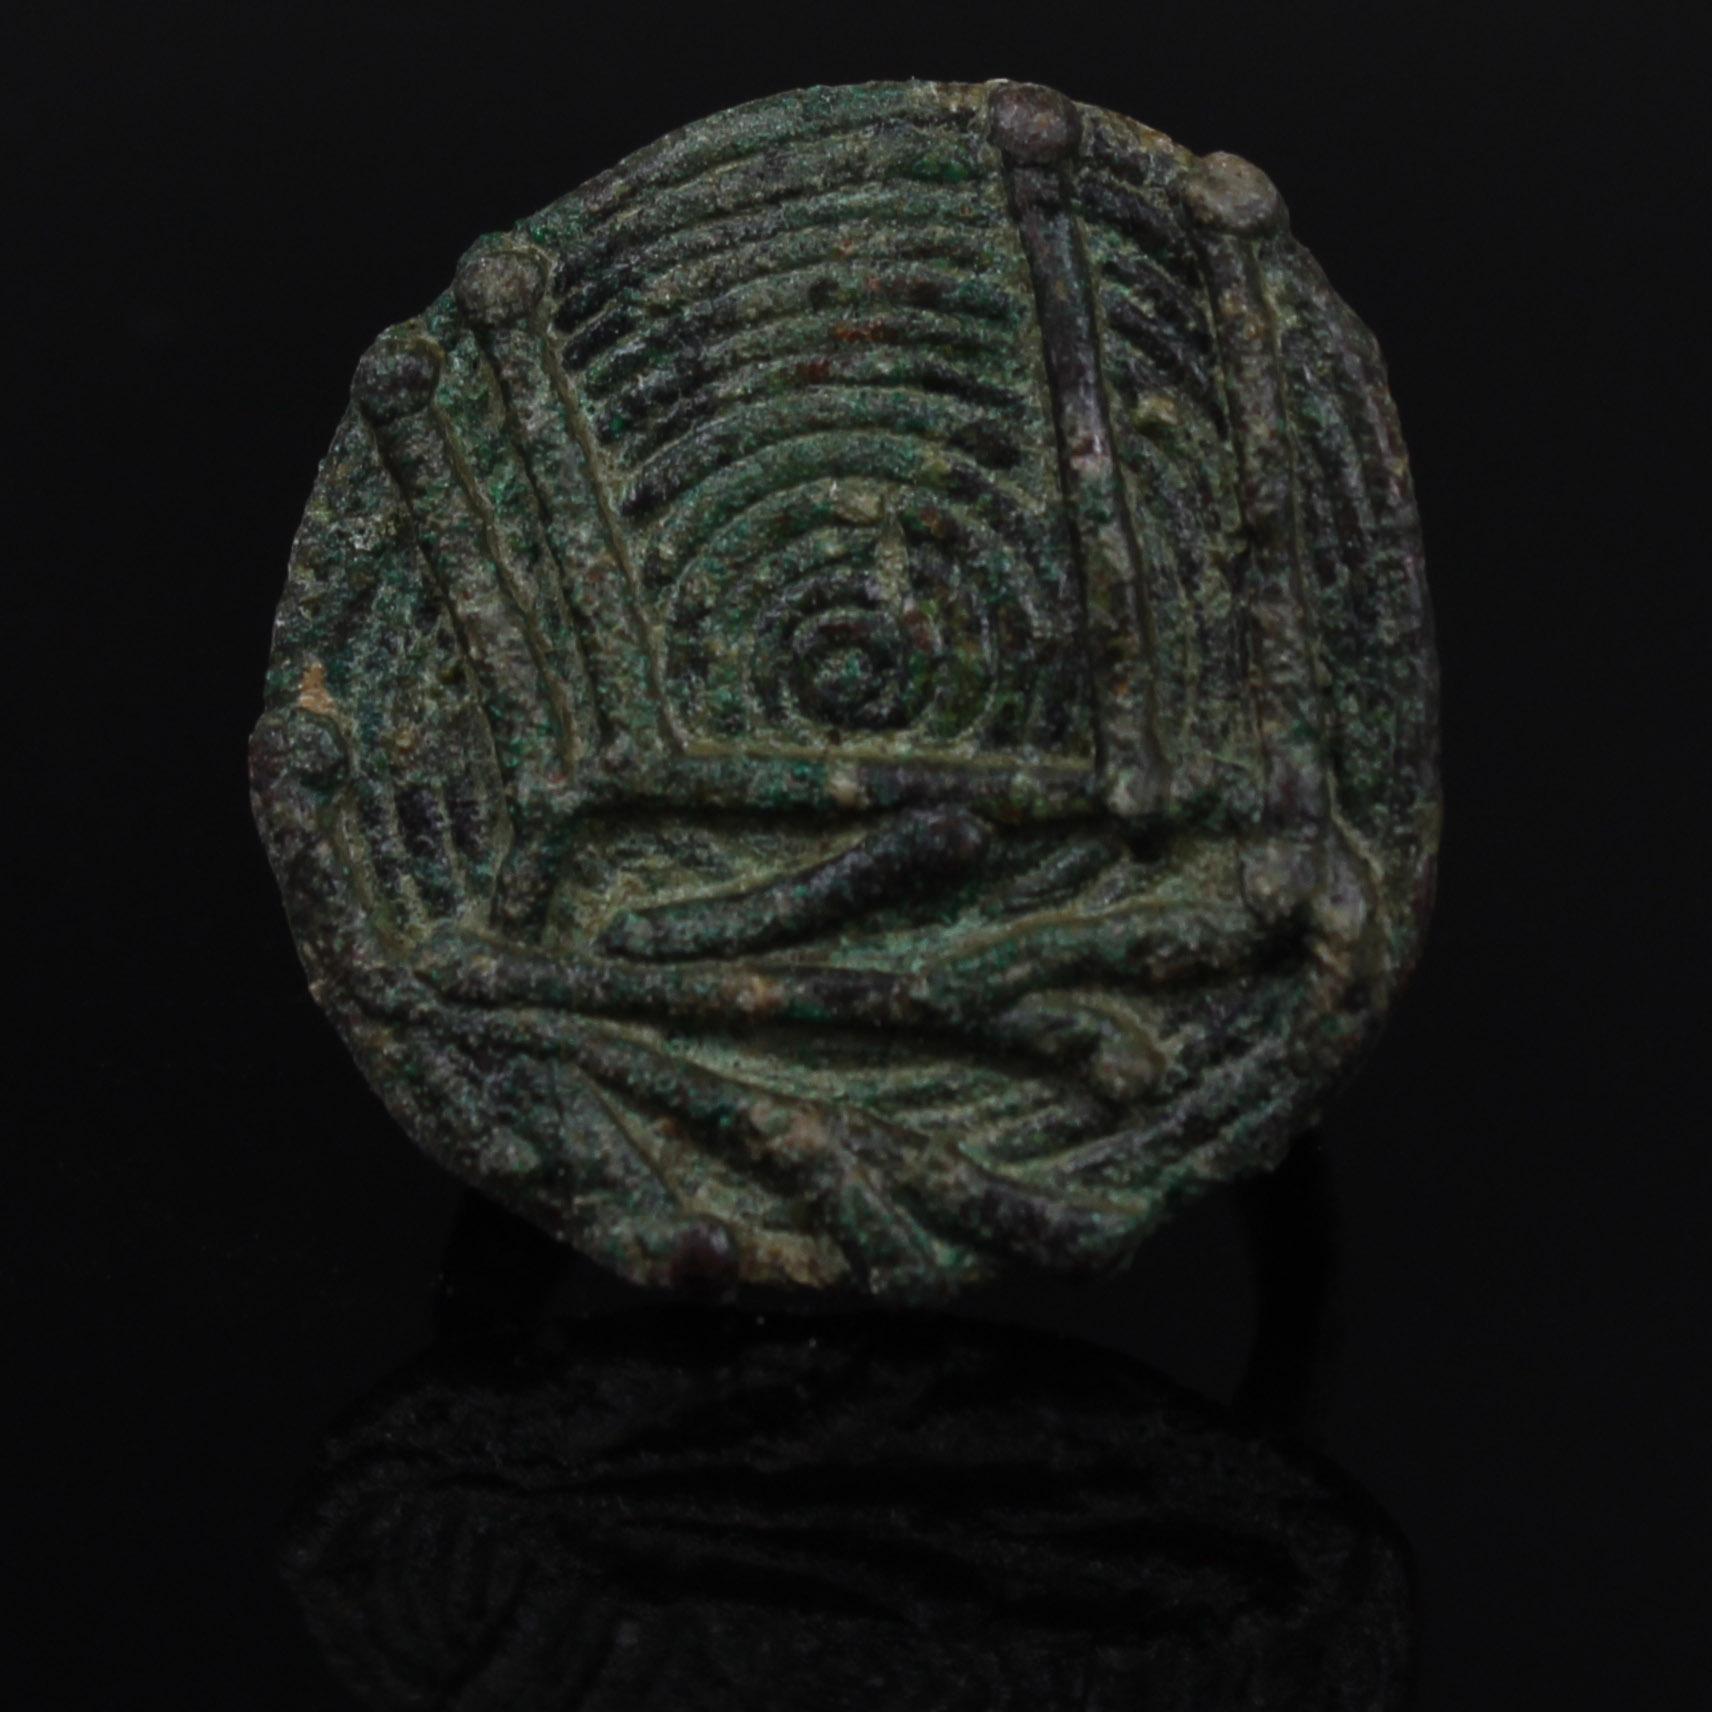 ITEM: Ring
MATERIAL: Bronze
CULTURE: Iron Age, Amlash
PERIOD: 1st millenium B.C
DIMENSIONS: 21 mm x 28 mm diameter
CONDITION: Good condition
PROVENANCE: Ex English private collection, acquired from London Gallery (1970s – 2000s)

Comes with